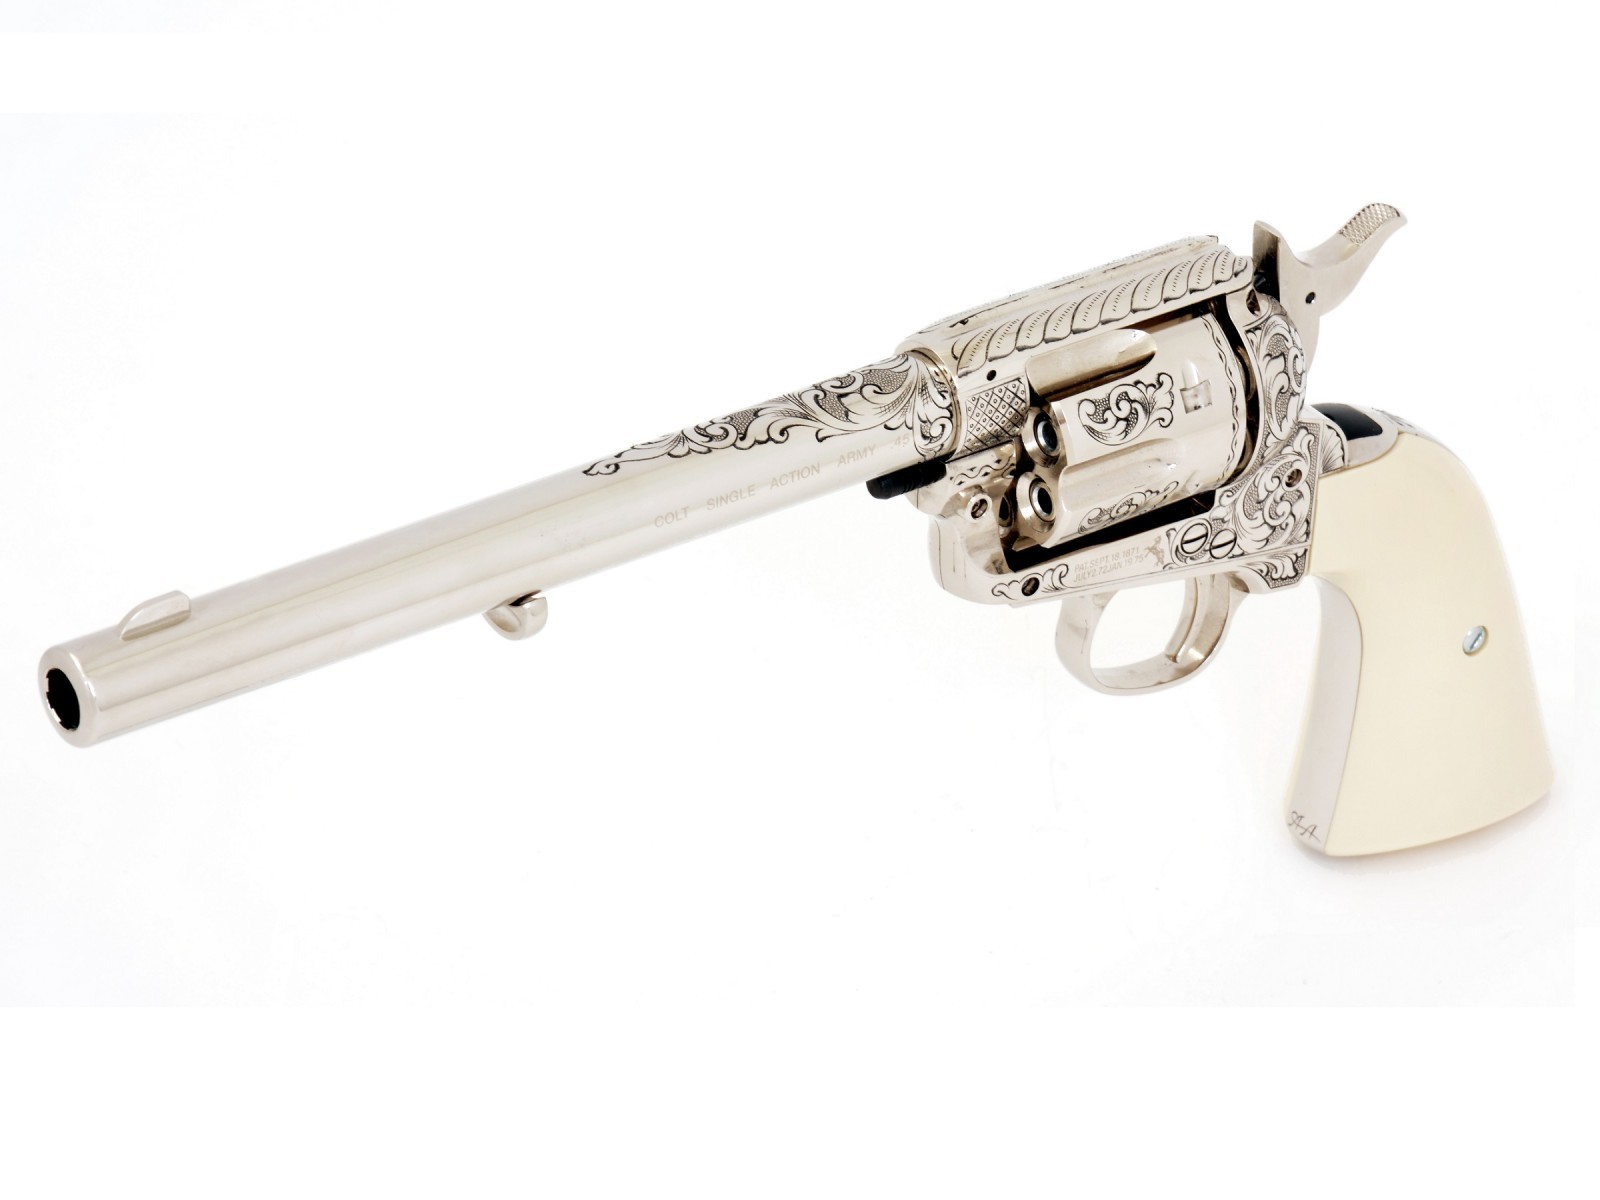 Limited Edition Nimschke 7.5" SAA Colt Peacemaker